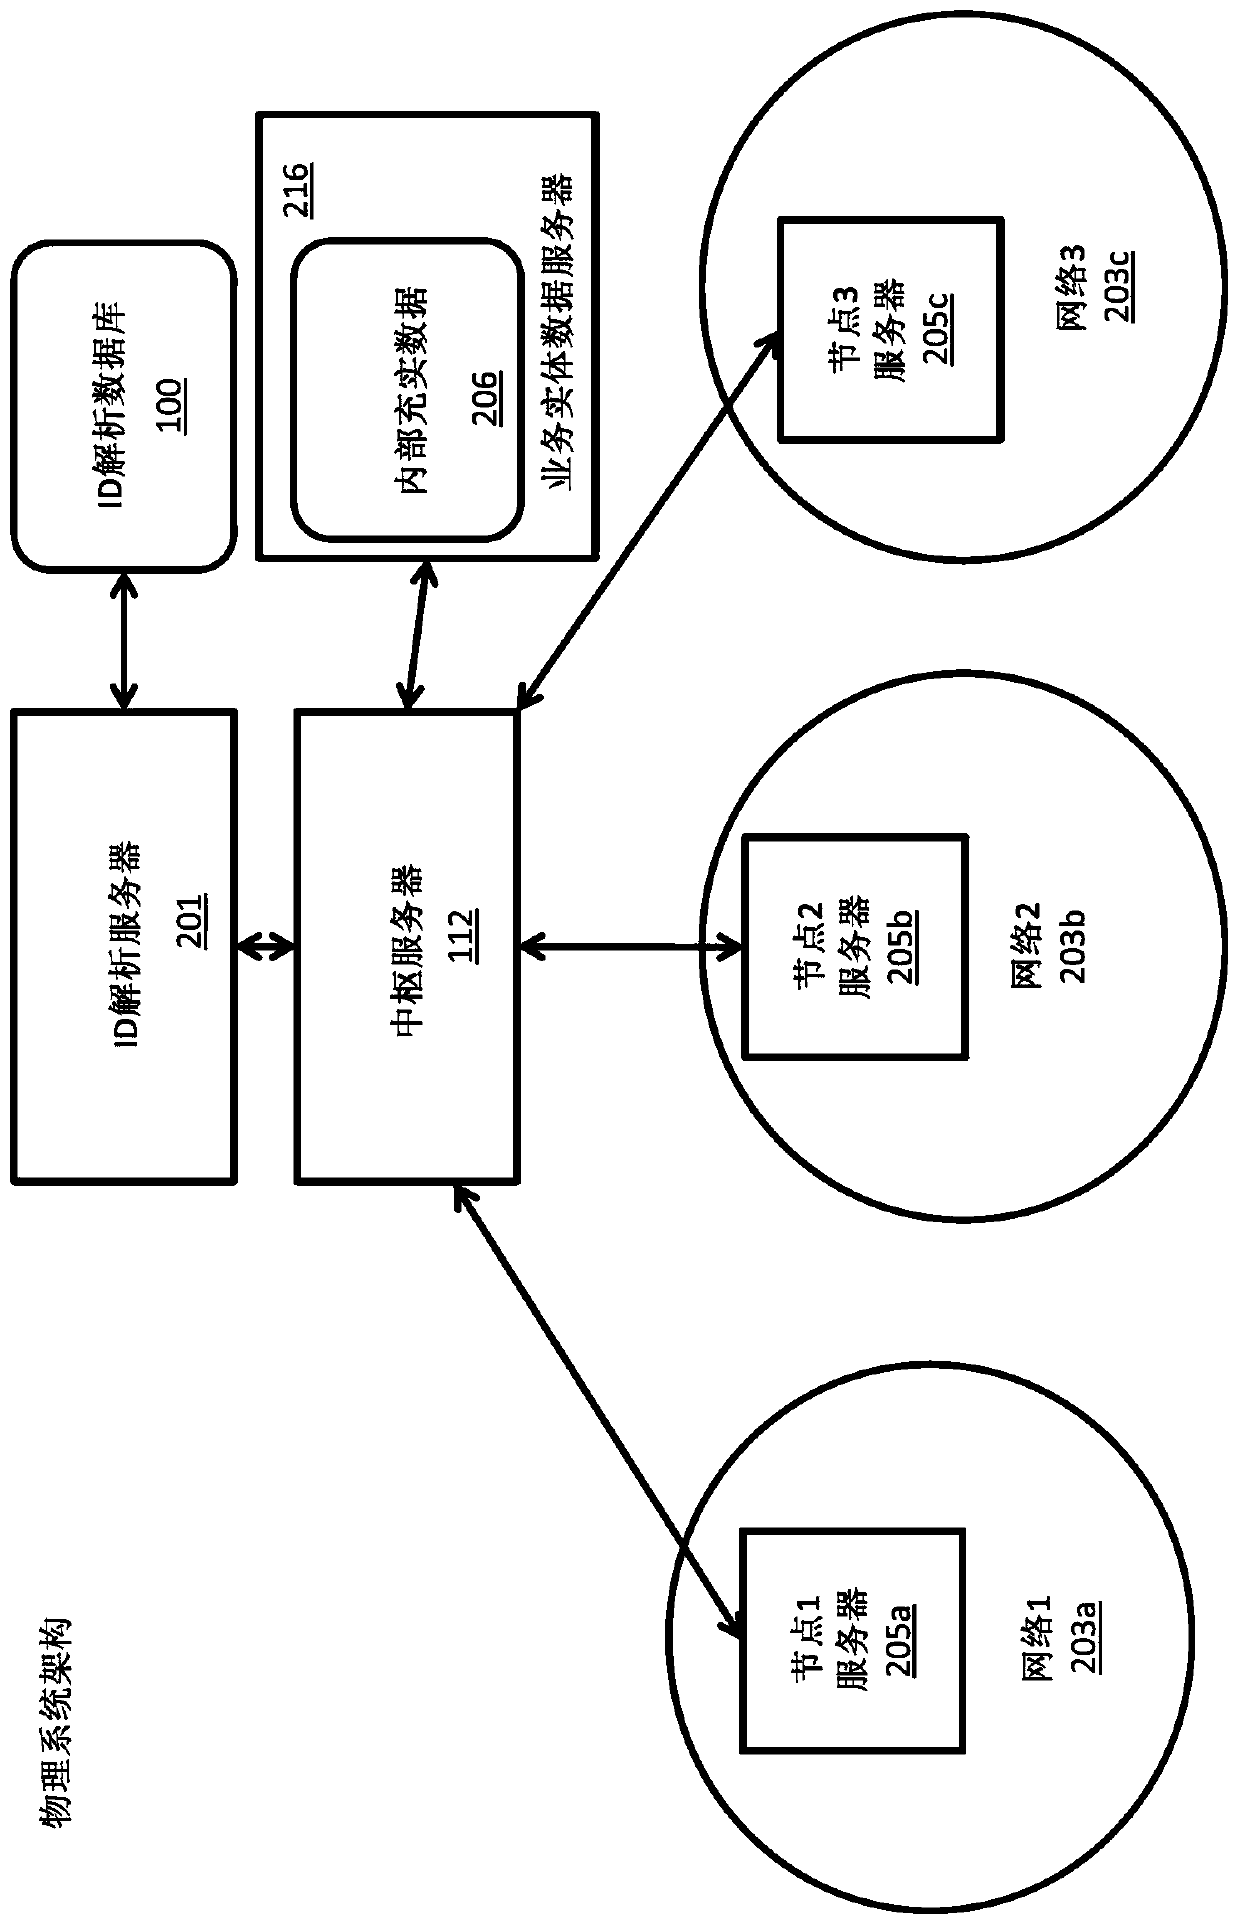 System and method for identity resolution across disparate distributed immutable ledger networks